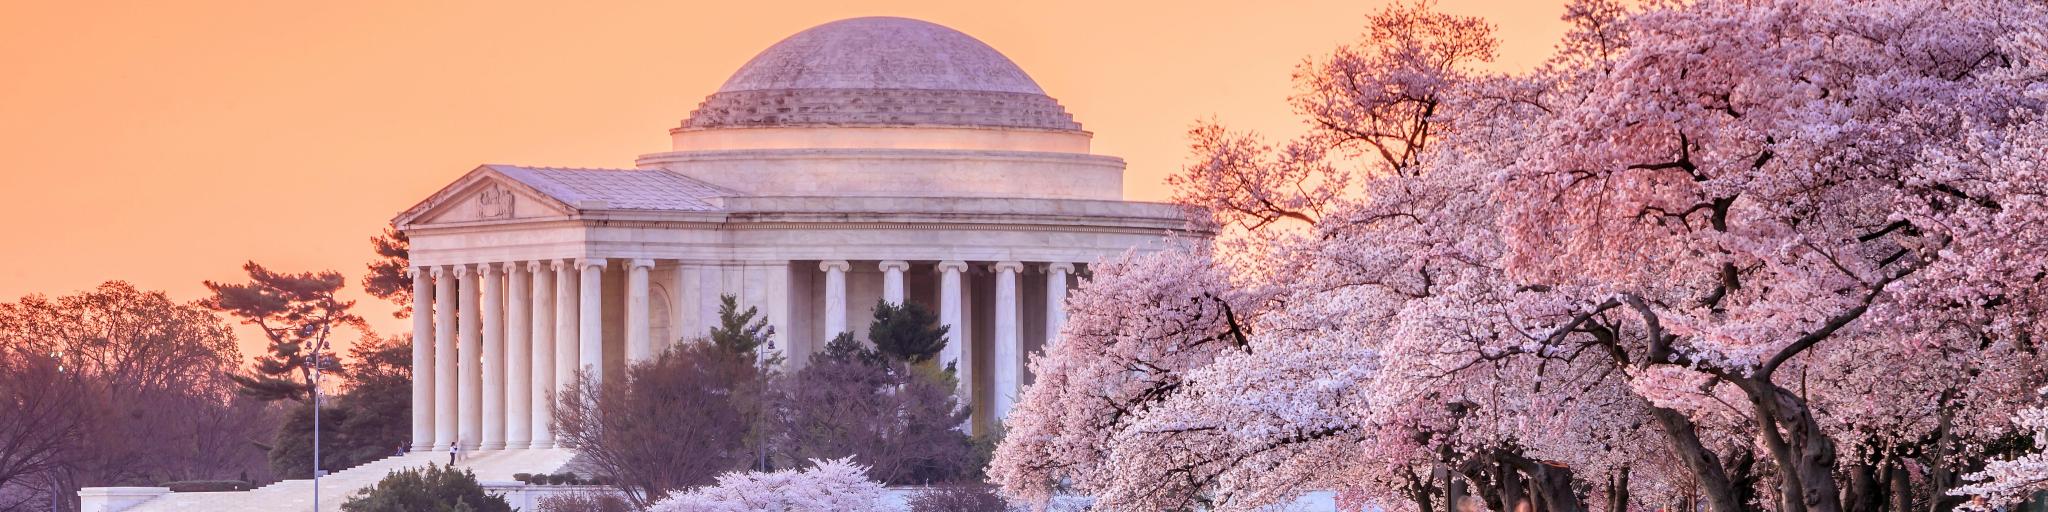 Famous building in Washington DC with blossoming cherry trees during a sunrise